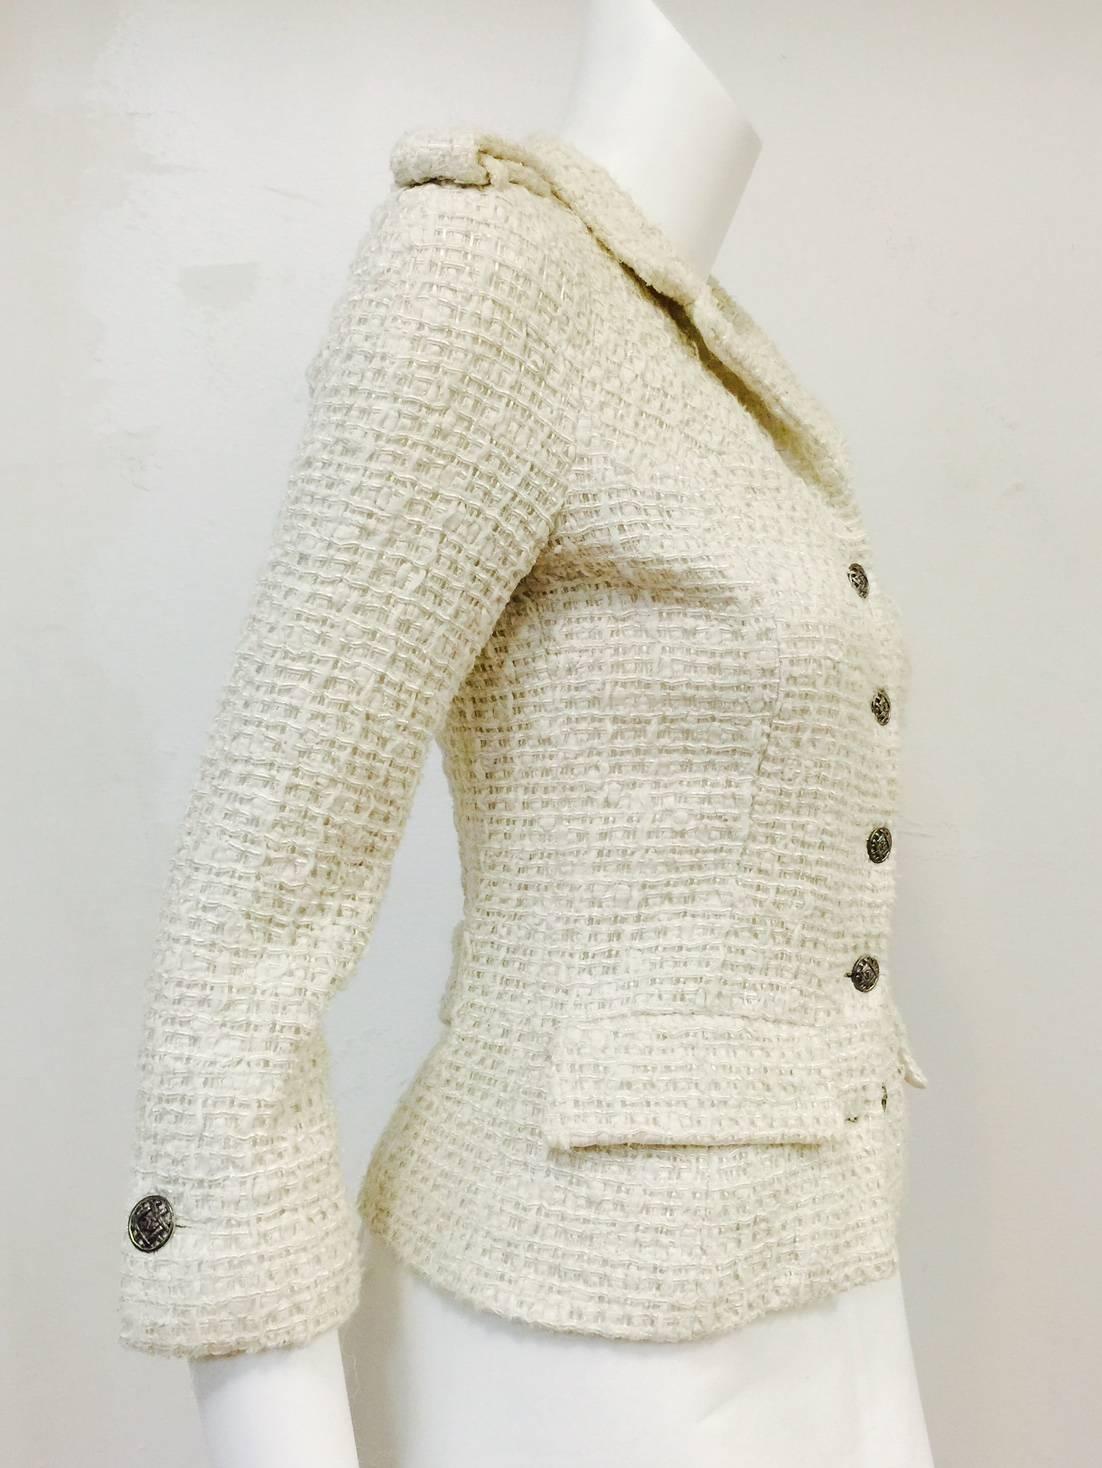 Chanel 2006 Cruise Collection Ivory Jacket is classic Coco!  Crafted from an elevated tweed  fabrication that made Coco 